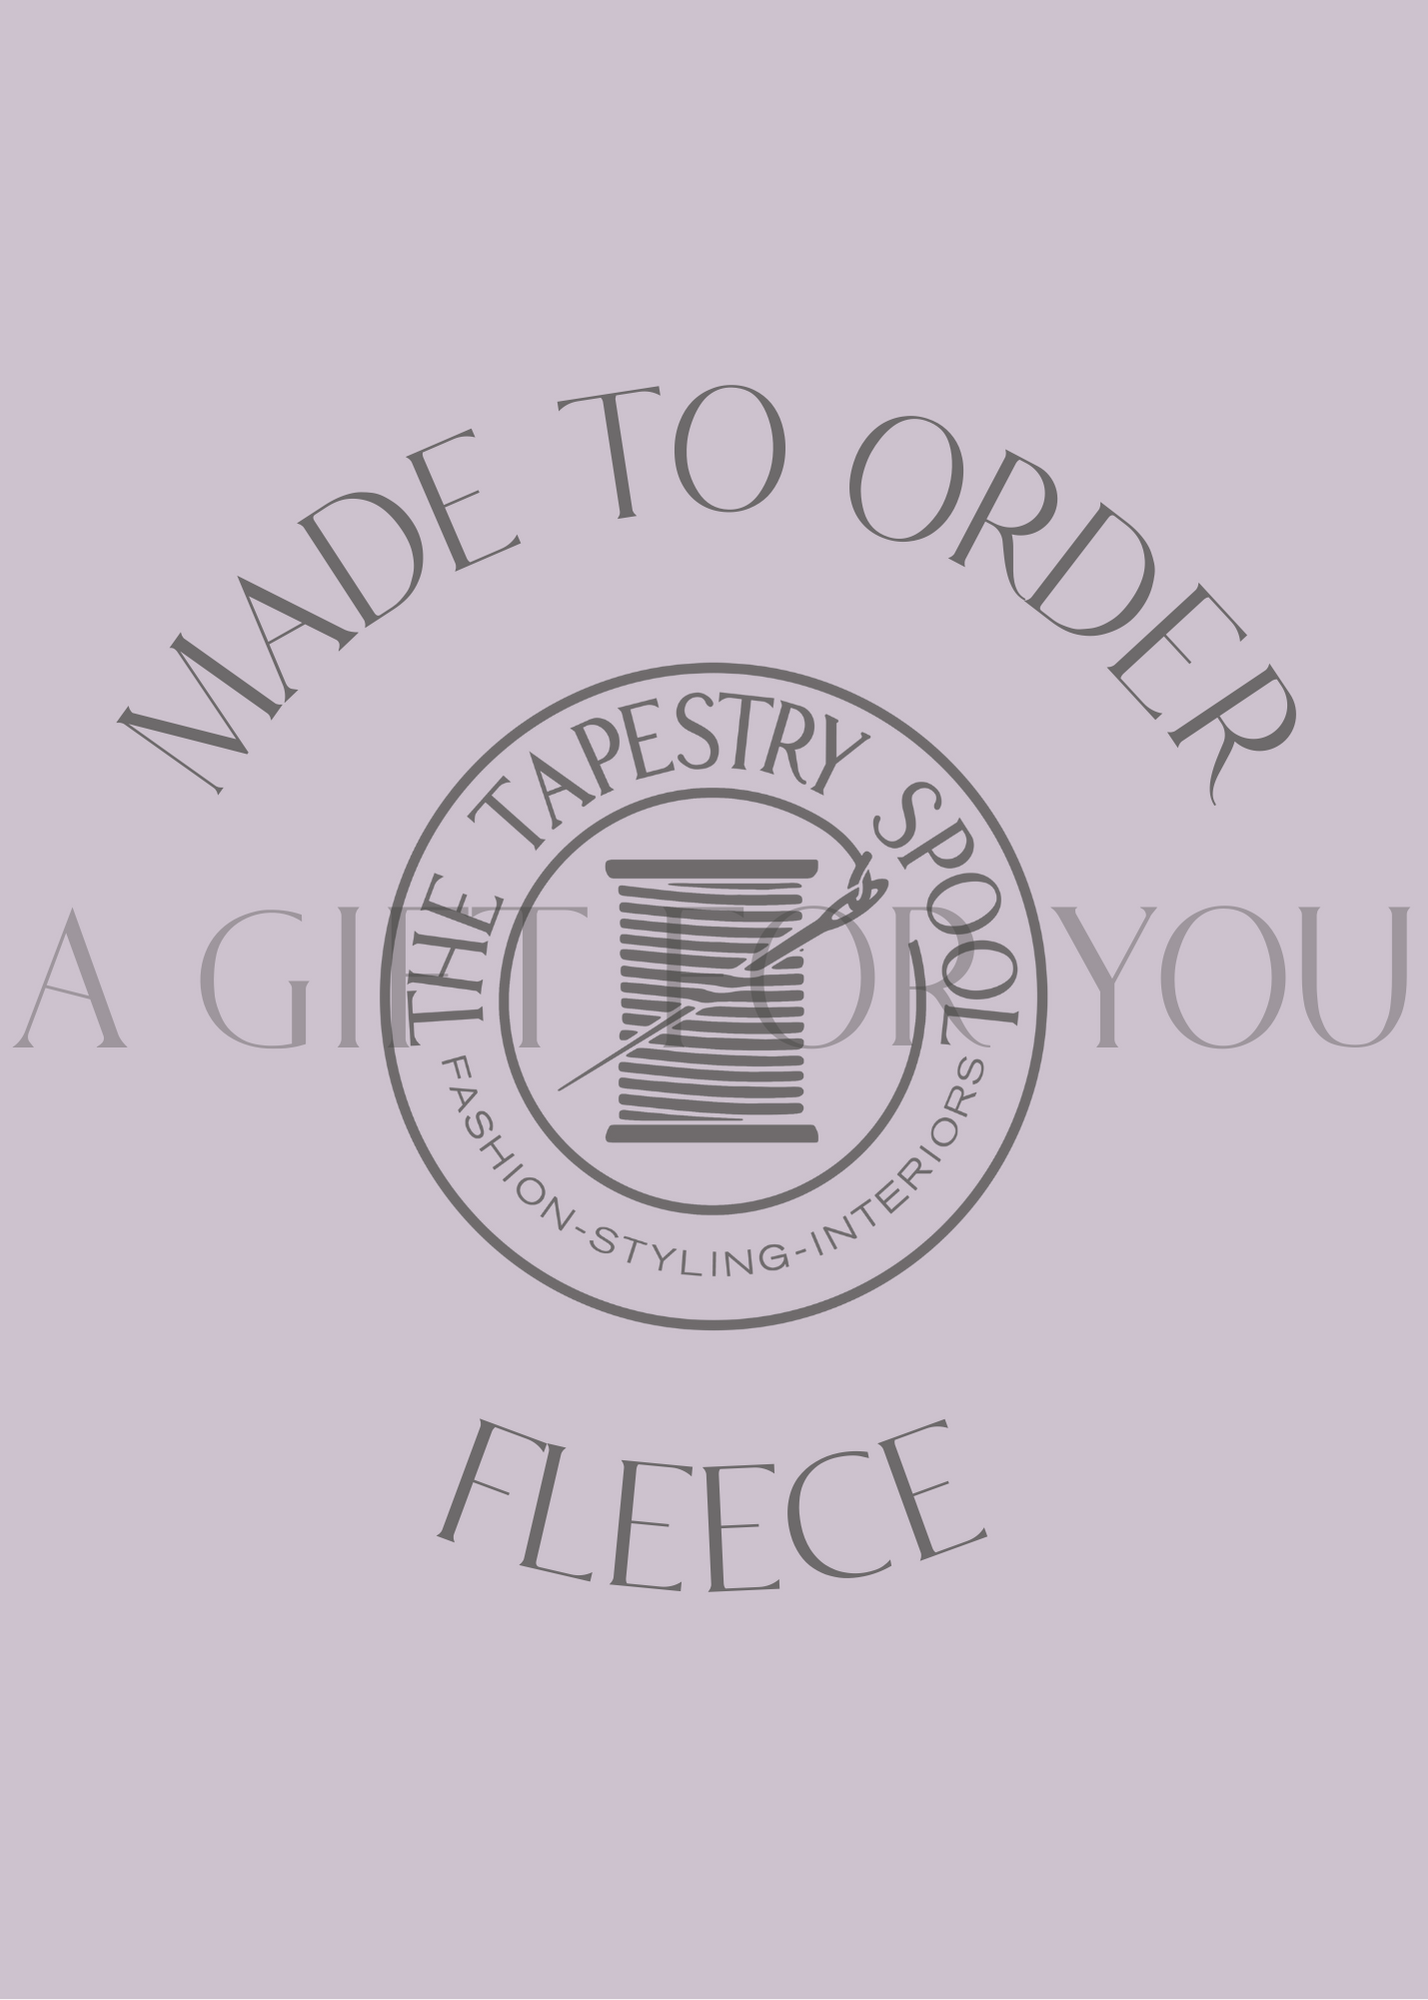 Made To Order - Gift